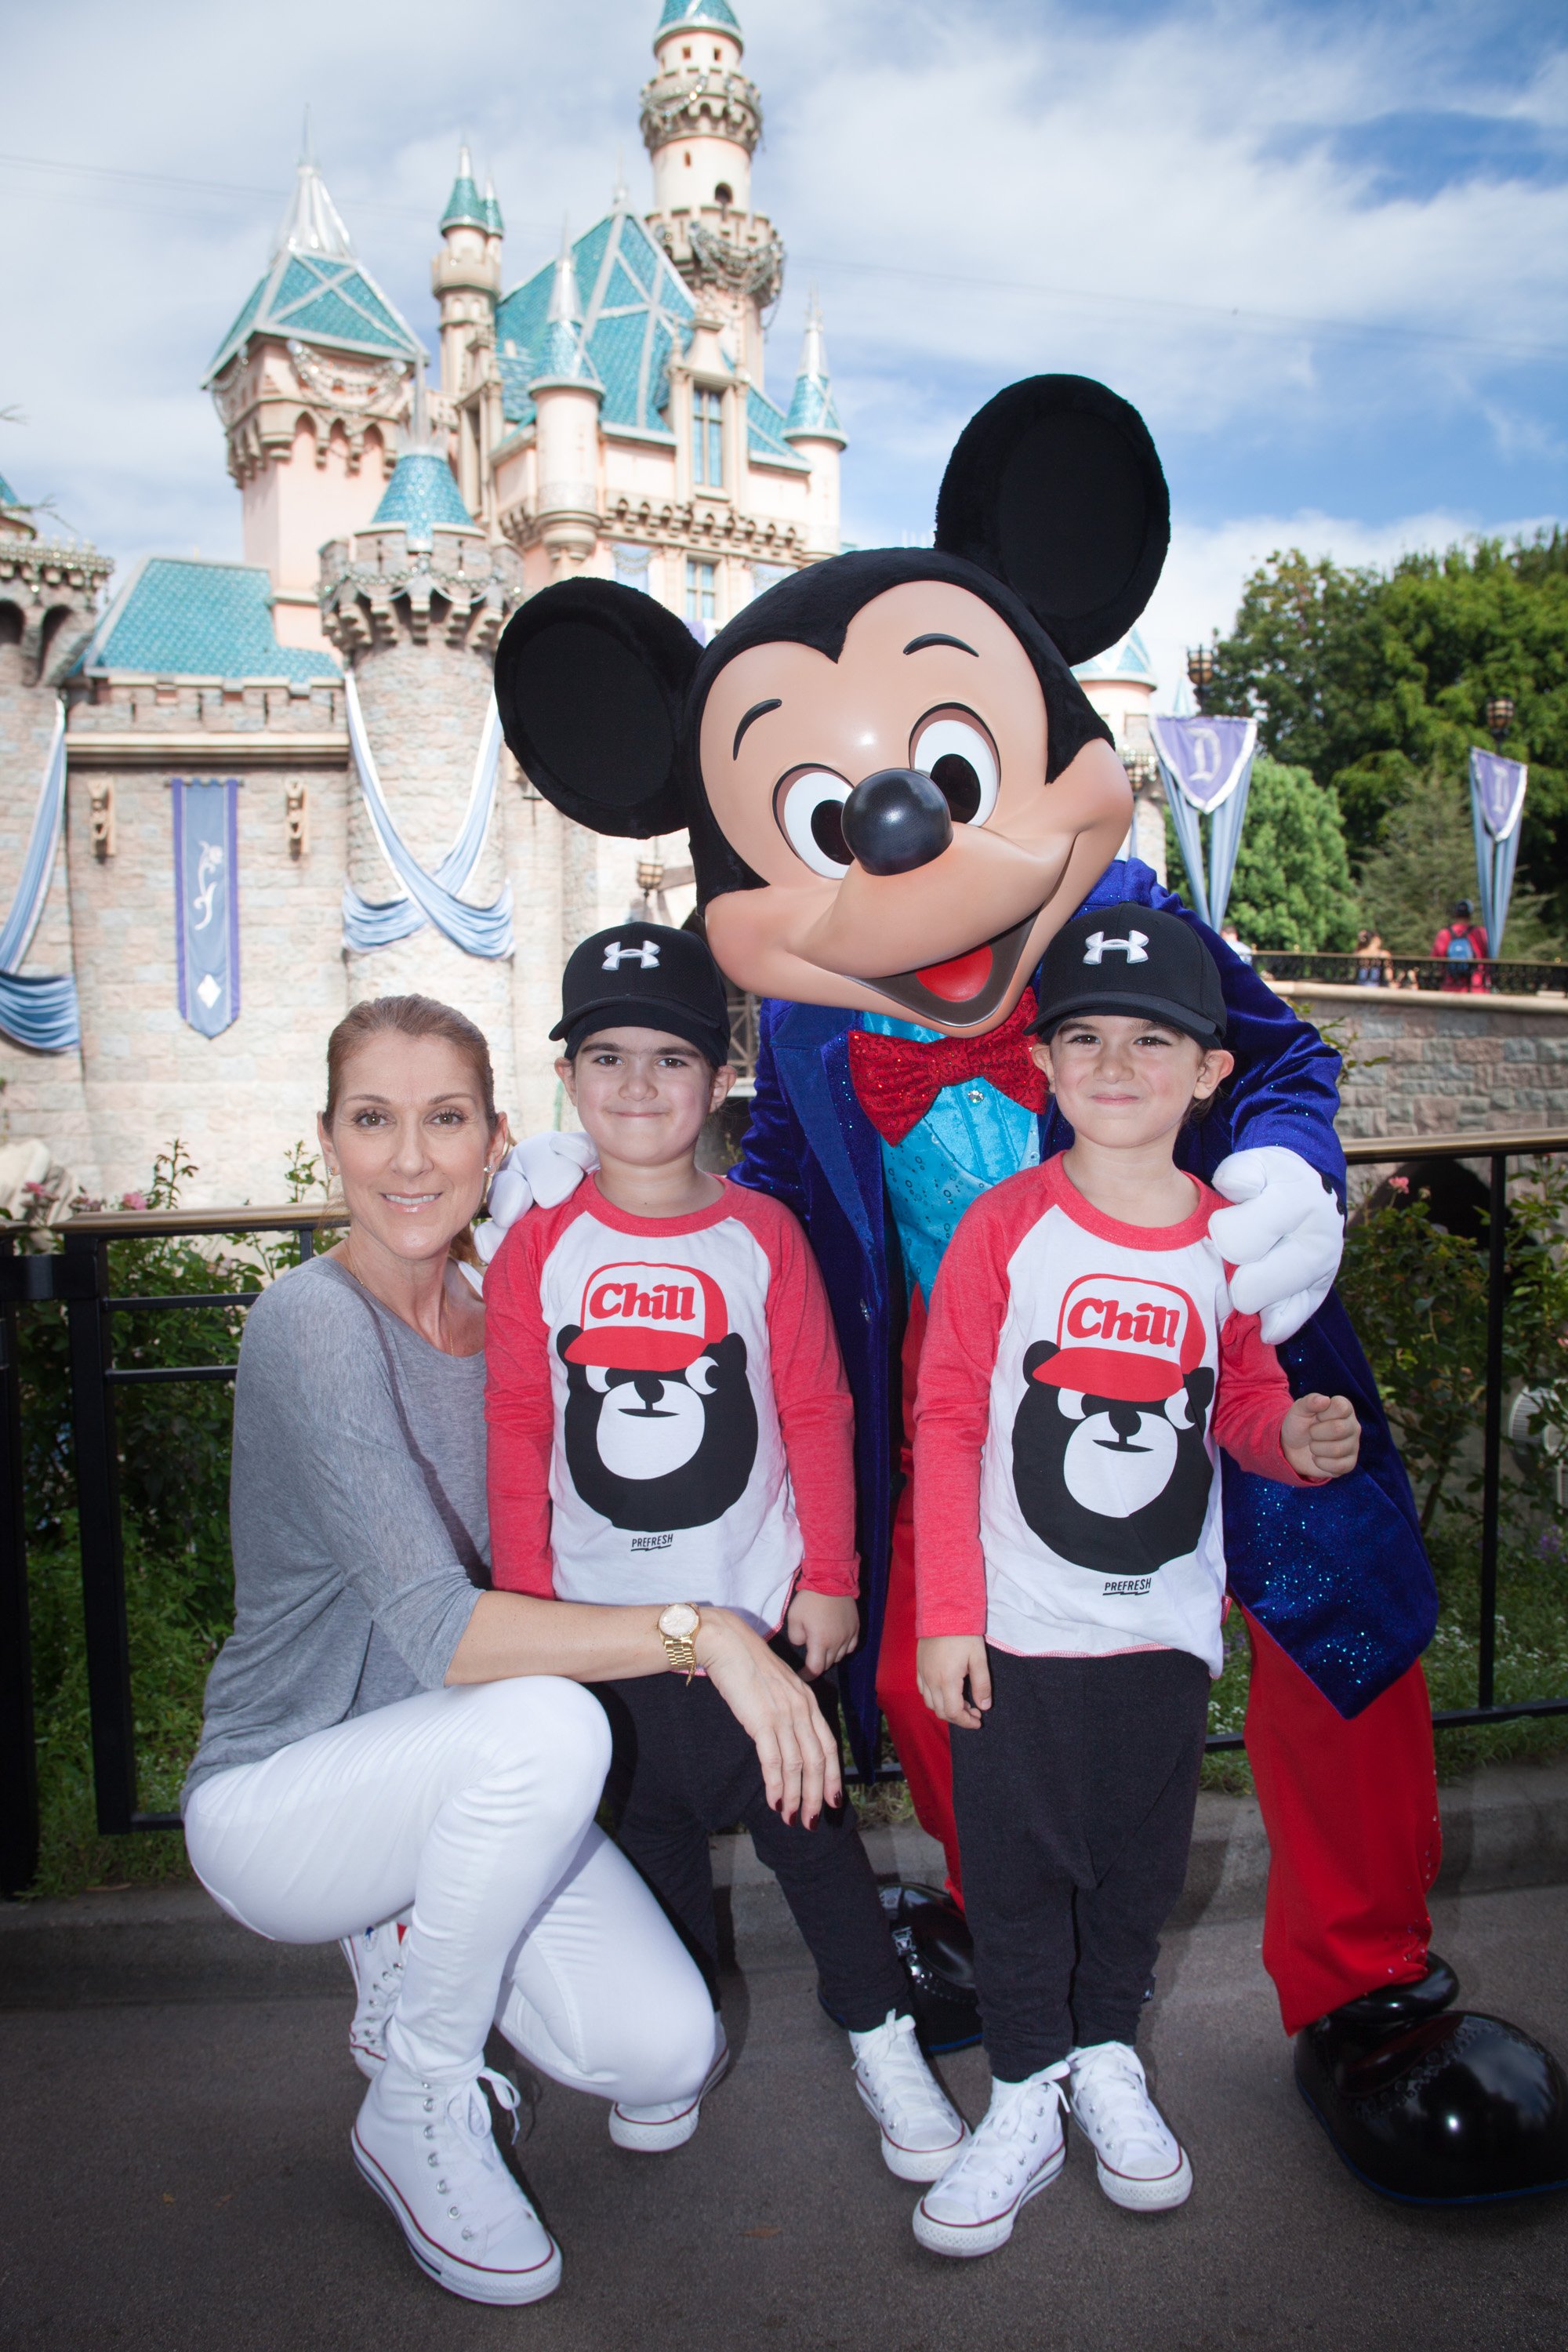 Celine Dion and her twin sons Eddy René Angélil (left) and Nelson René Angélil (right) at Disneyland park on October 14, 2016, in Anaheim, California. | Source: Getty Images 